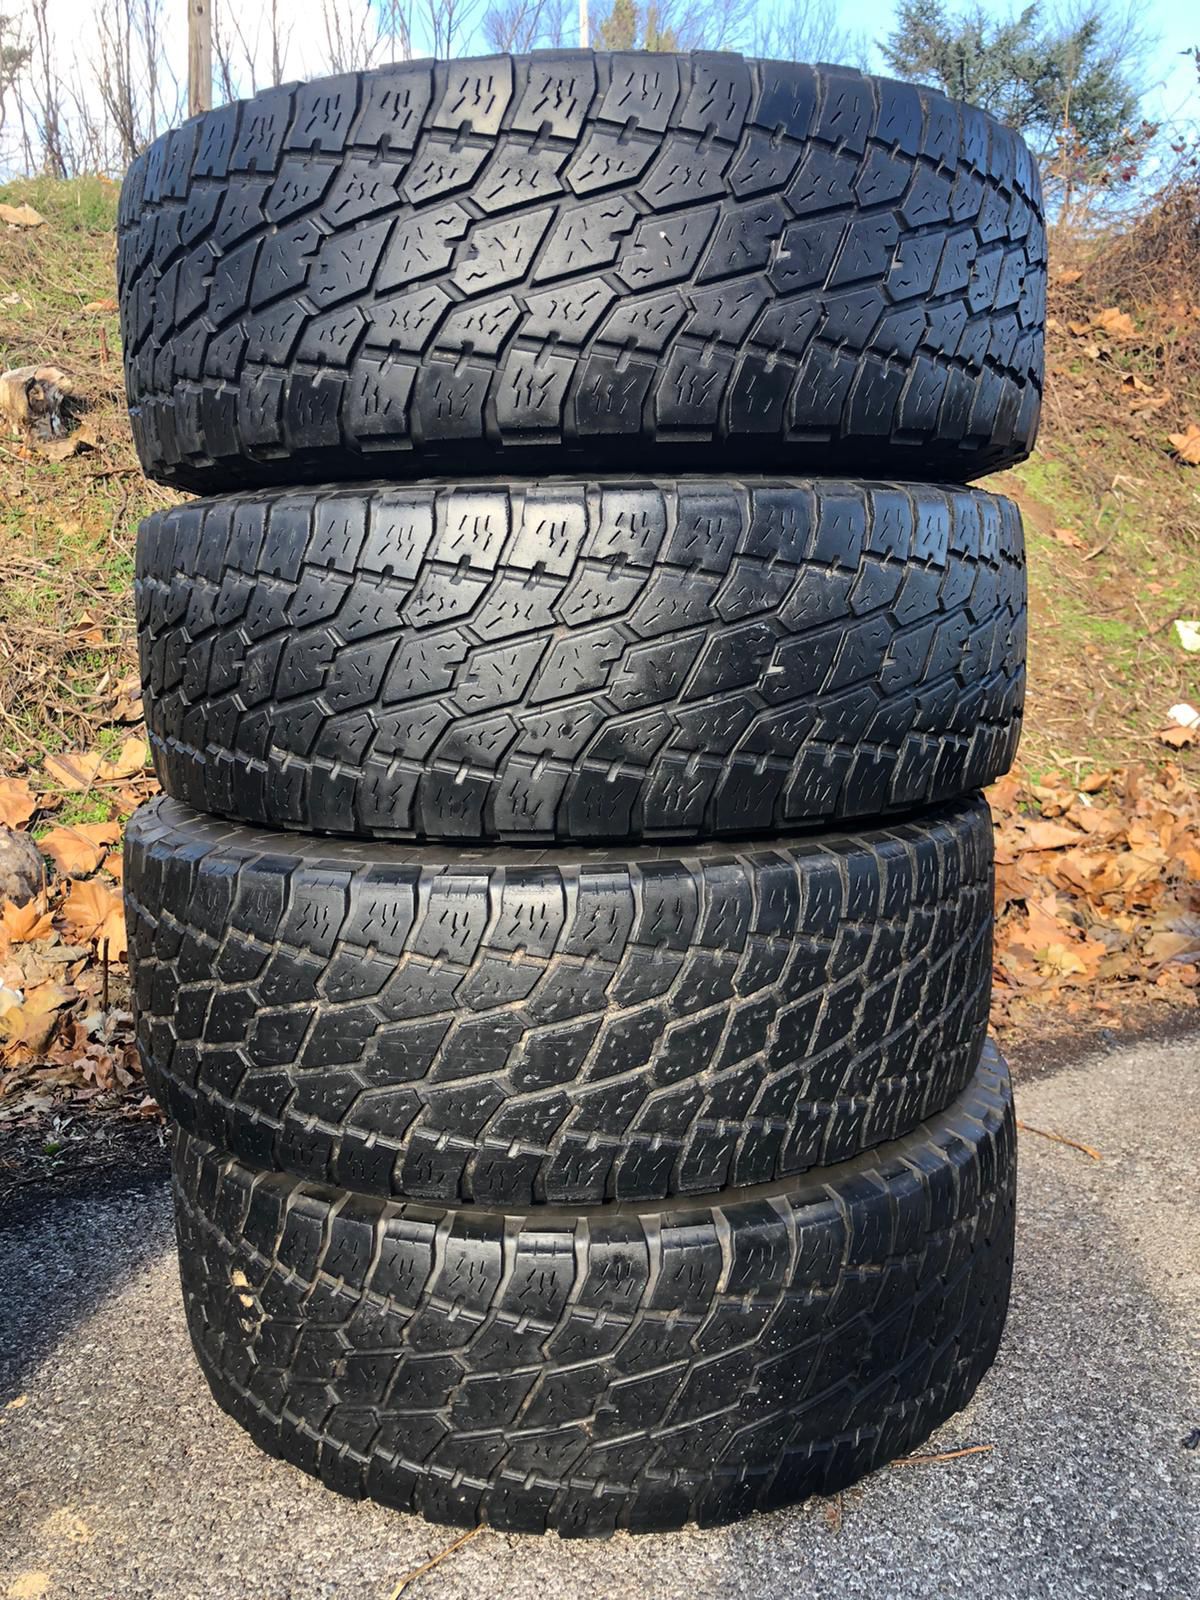 Used tires 295/70/18 nitto all terrain mount and balance includes $250